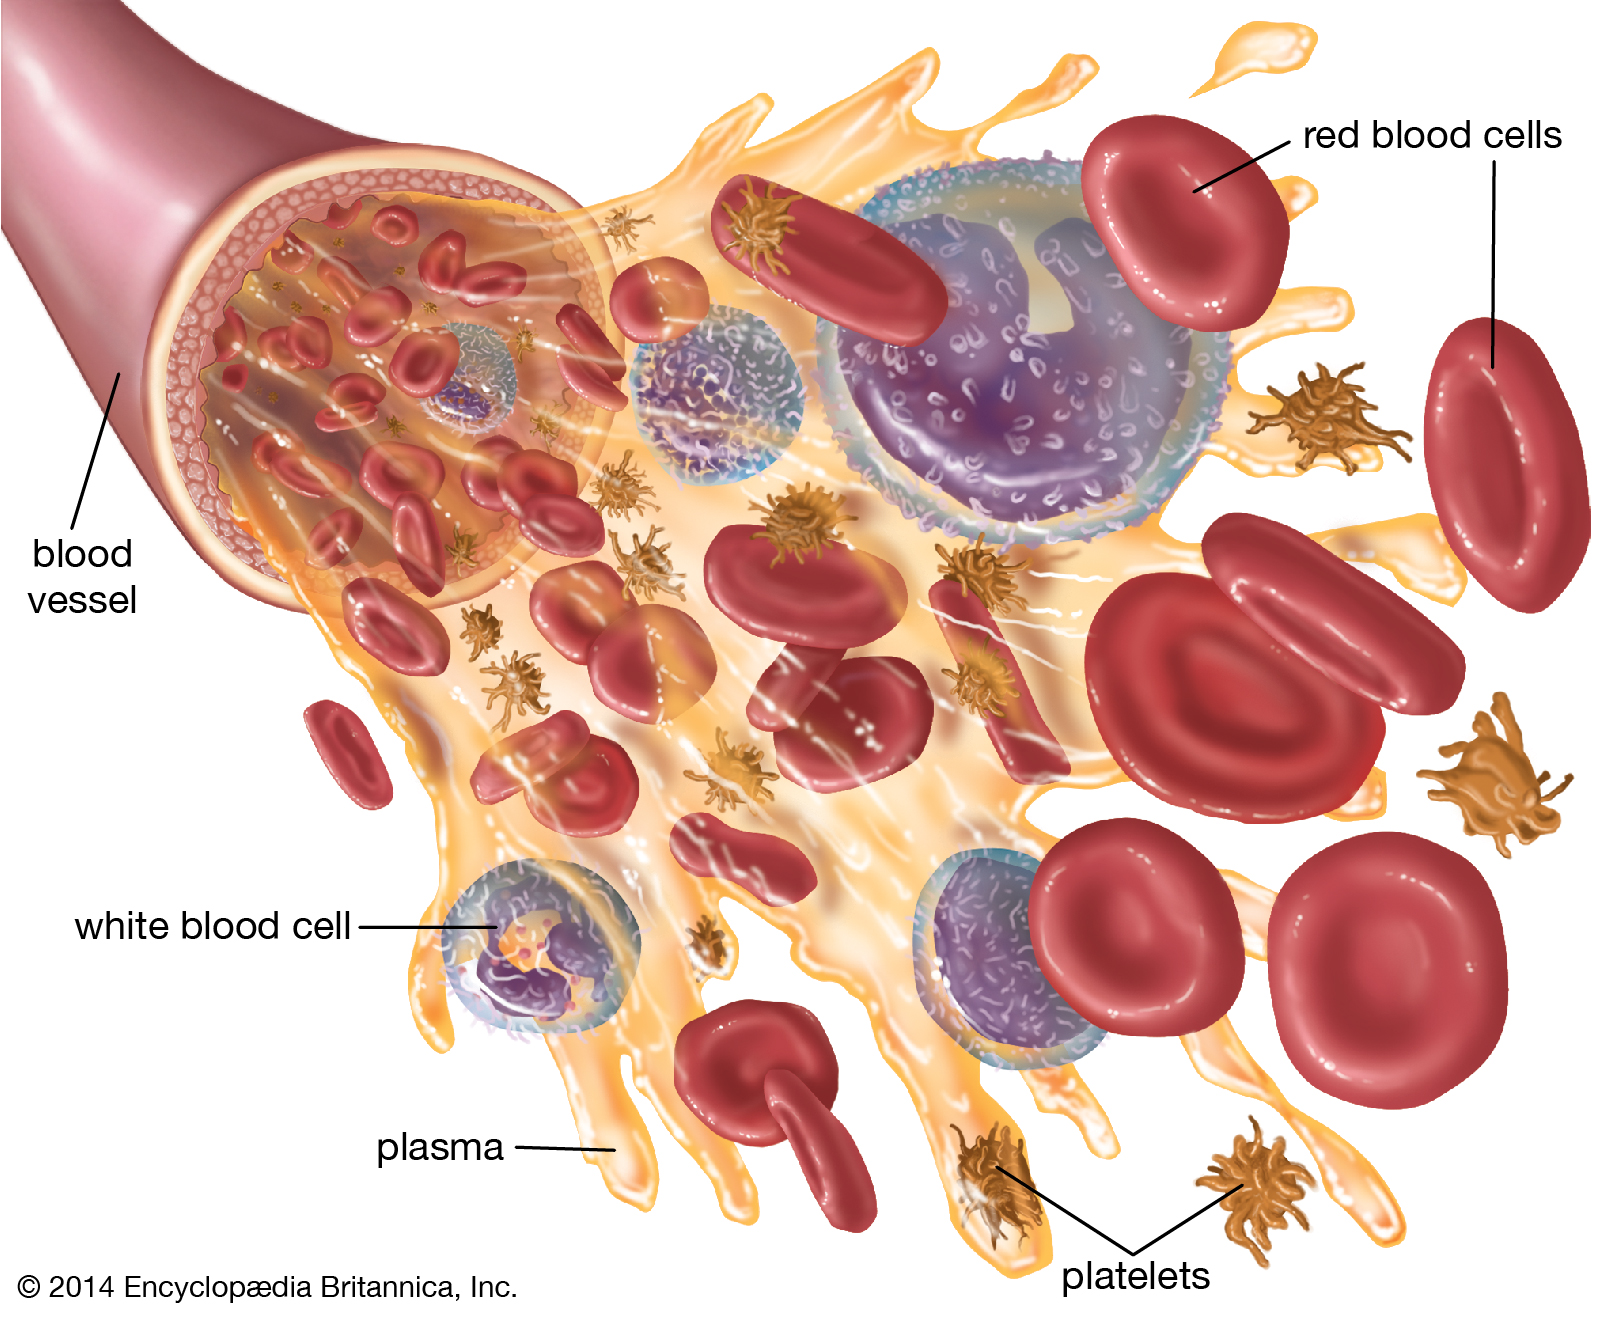 Blood and blood cells